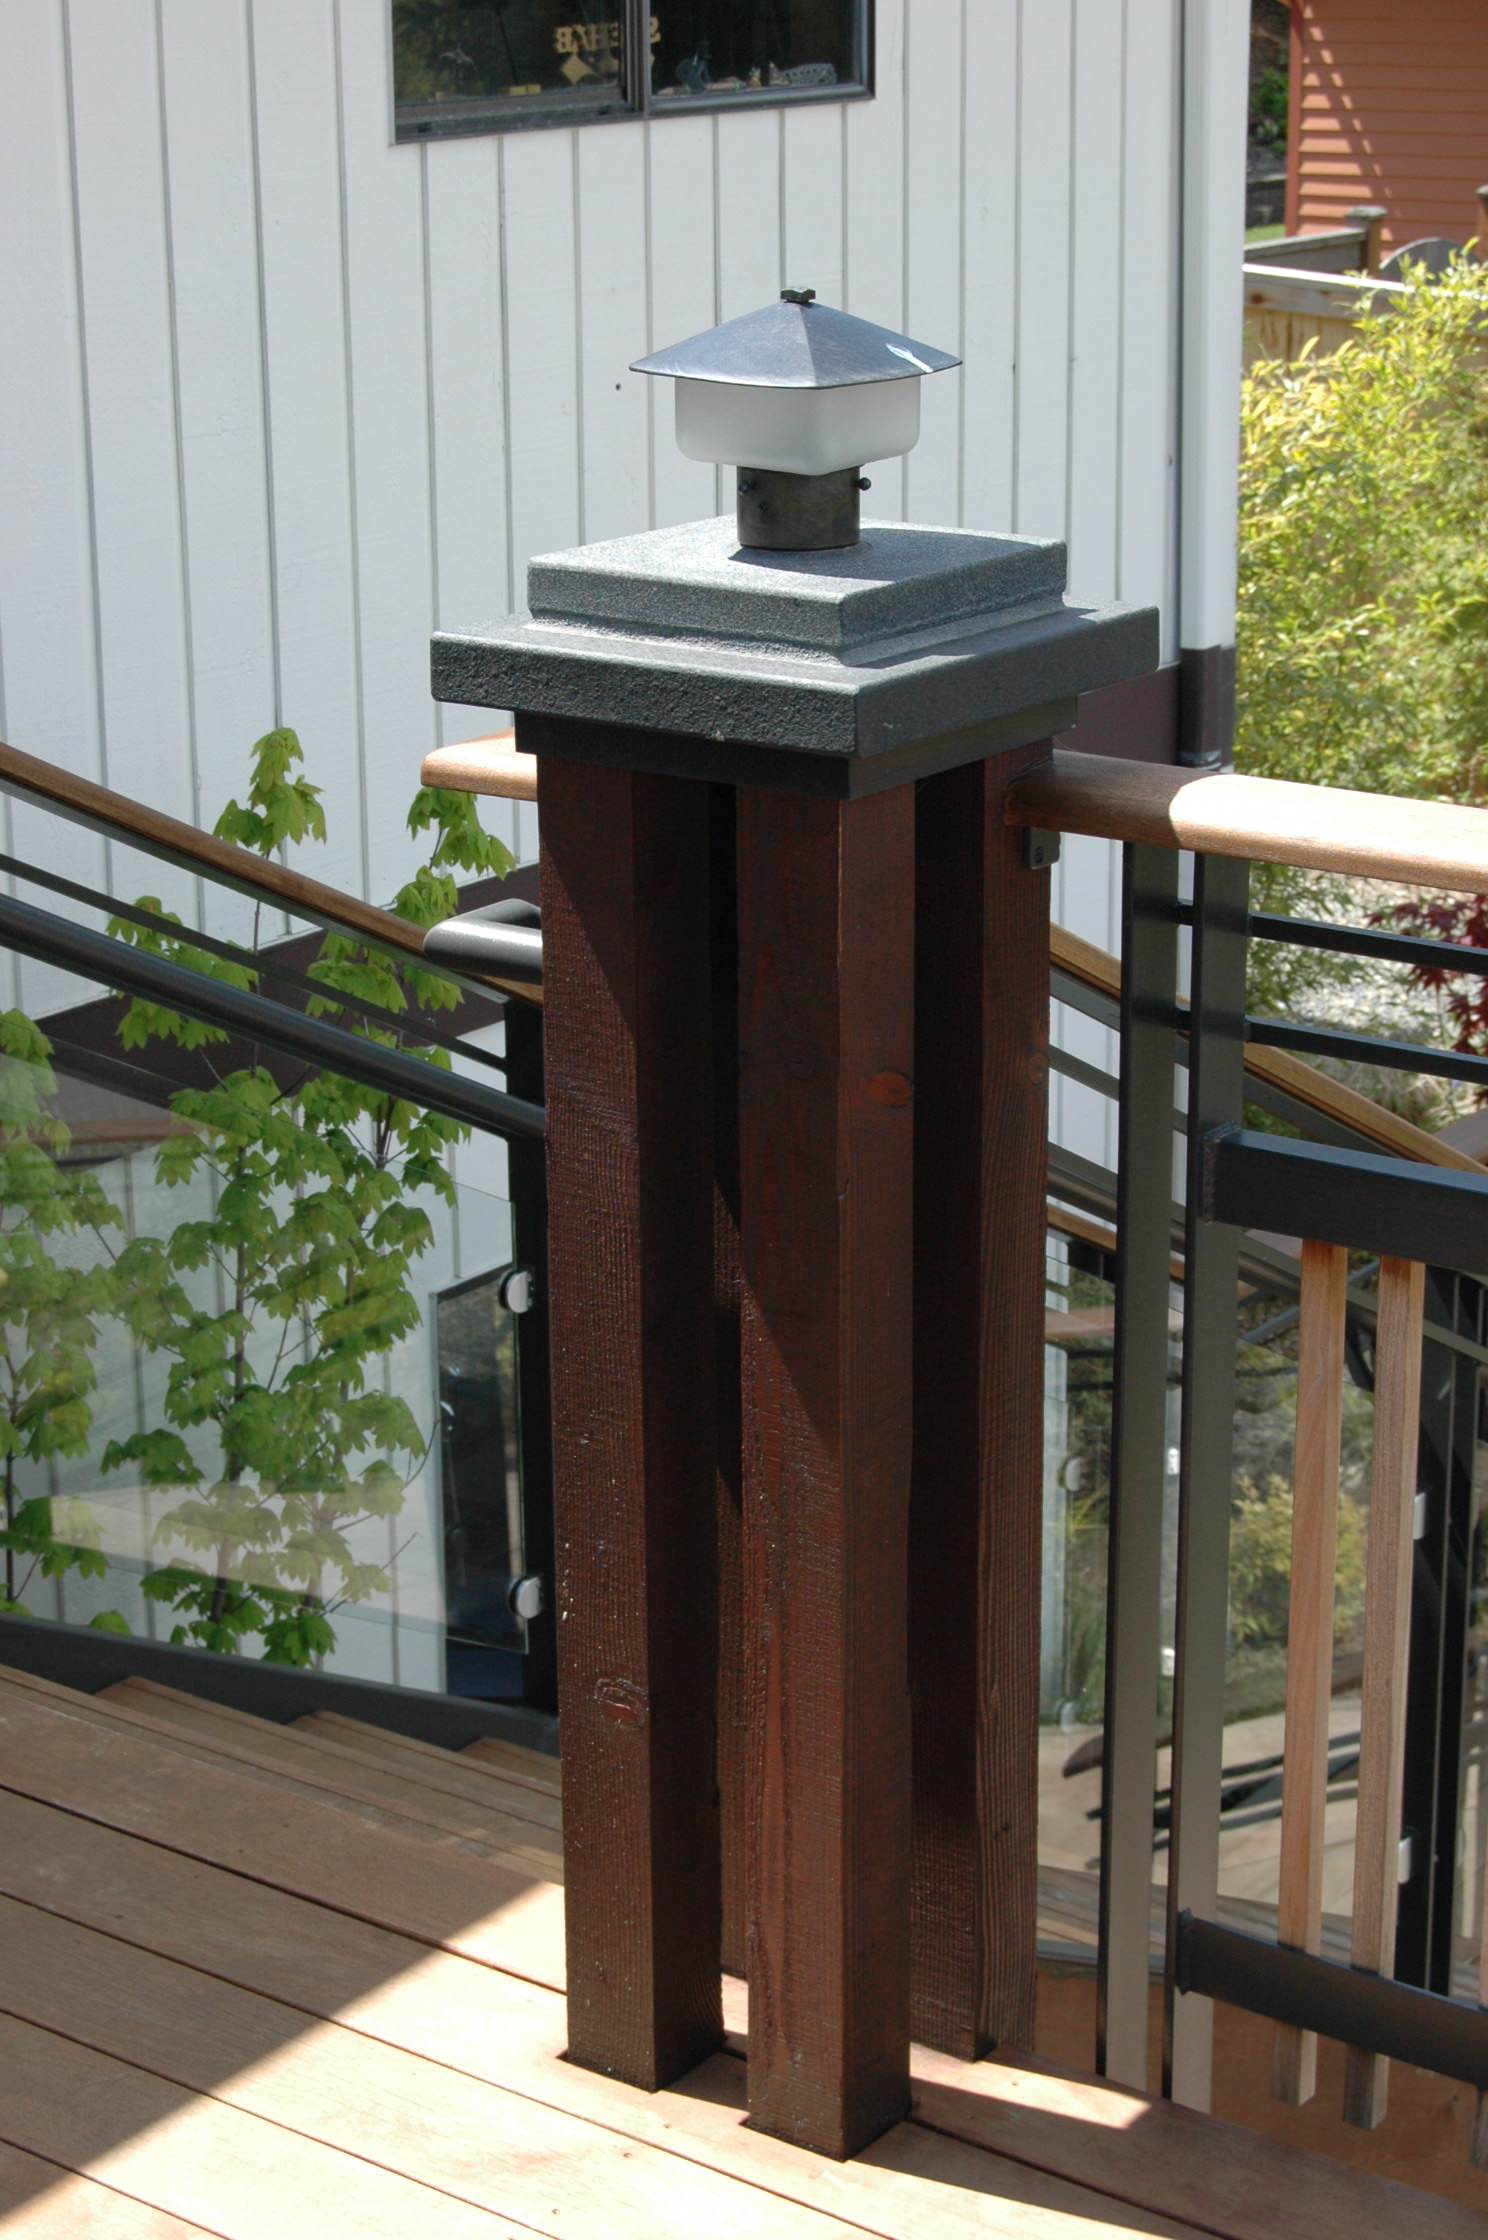 Expressed structure - railing post with lighting